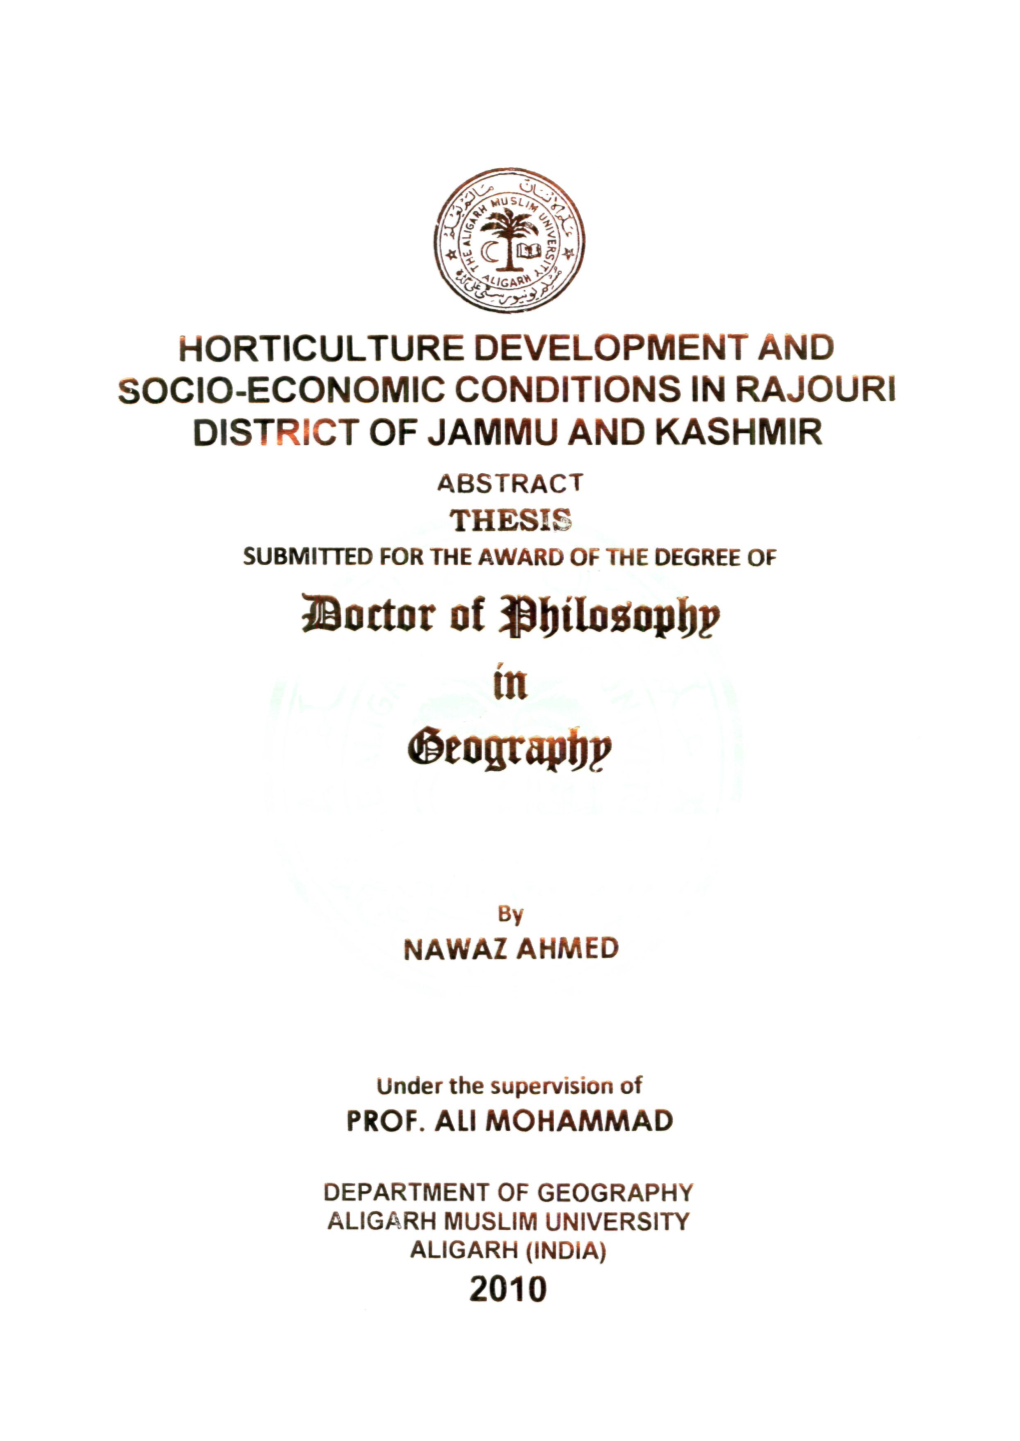 Horticulture Development and Socio-Economic Conditions in Rajouri District of Jammu and Kashmir Abstract Thesis